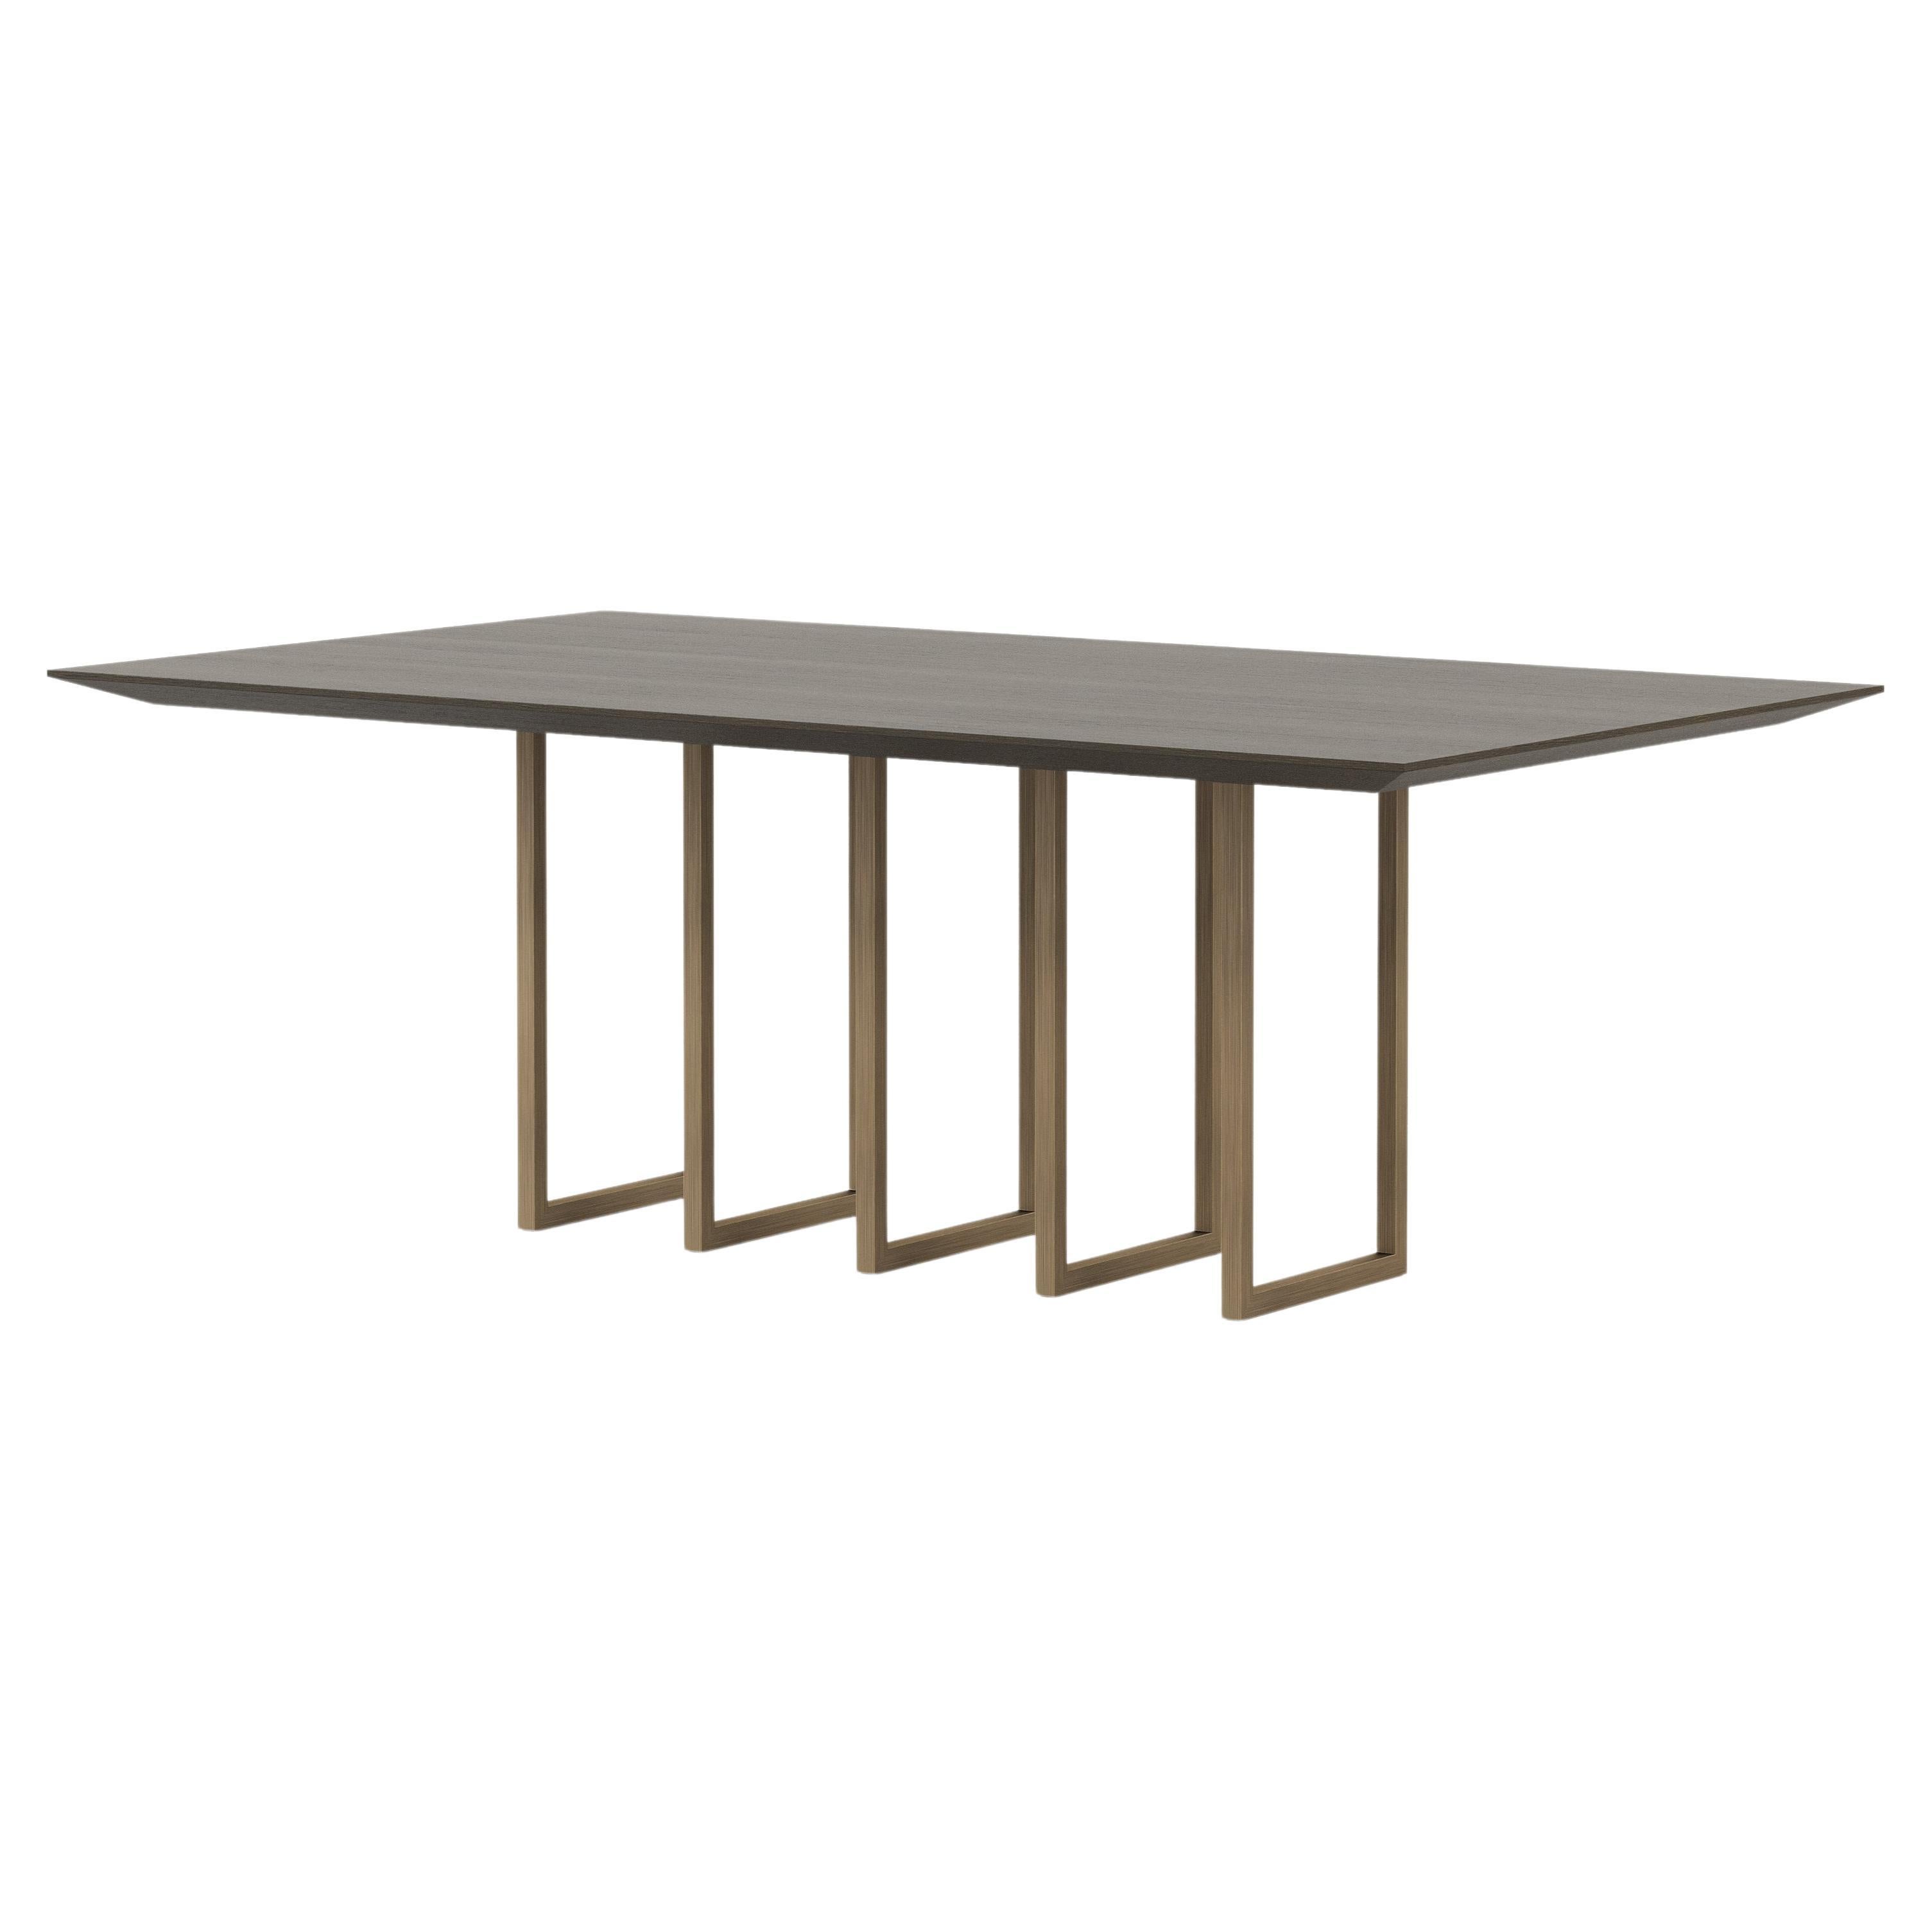 Modern Slender Dining Table Made with Walnut and Iron, Handmade by Stylish Club